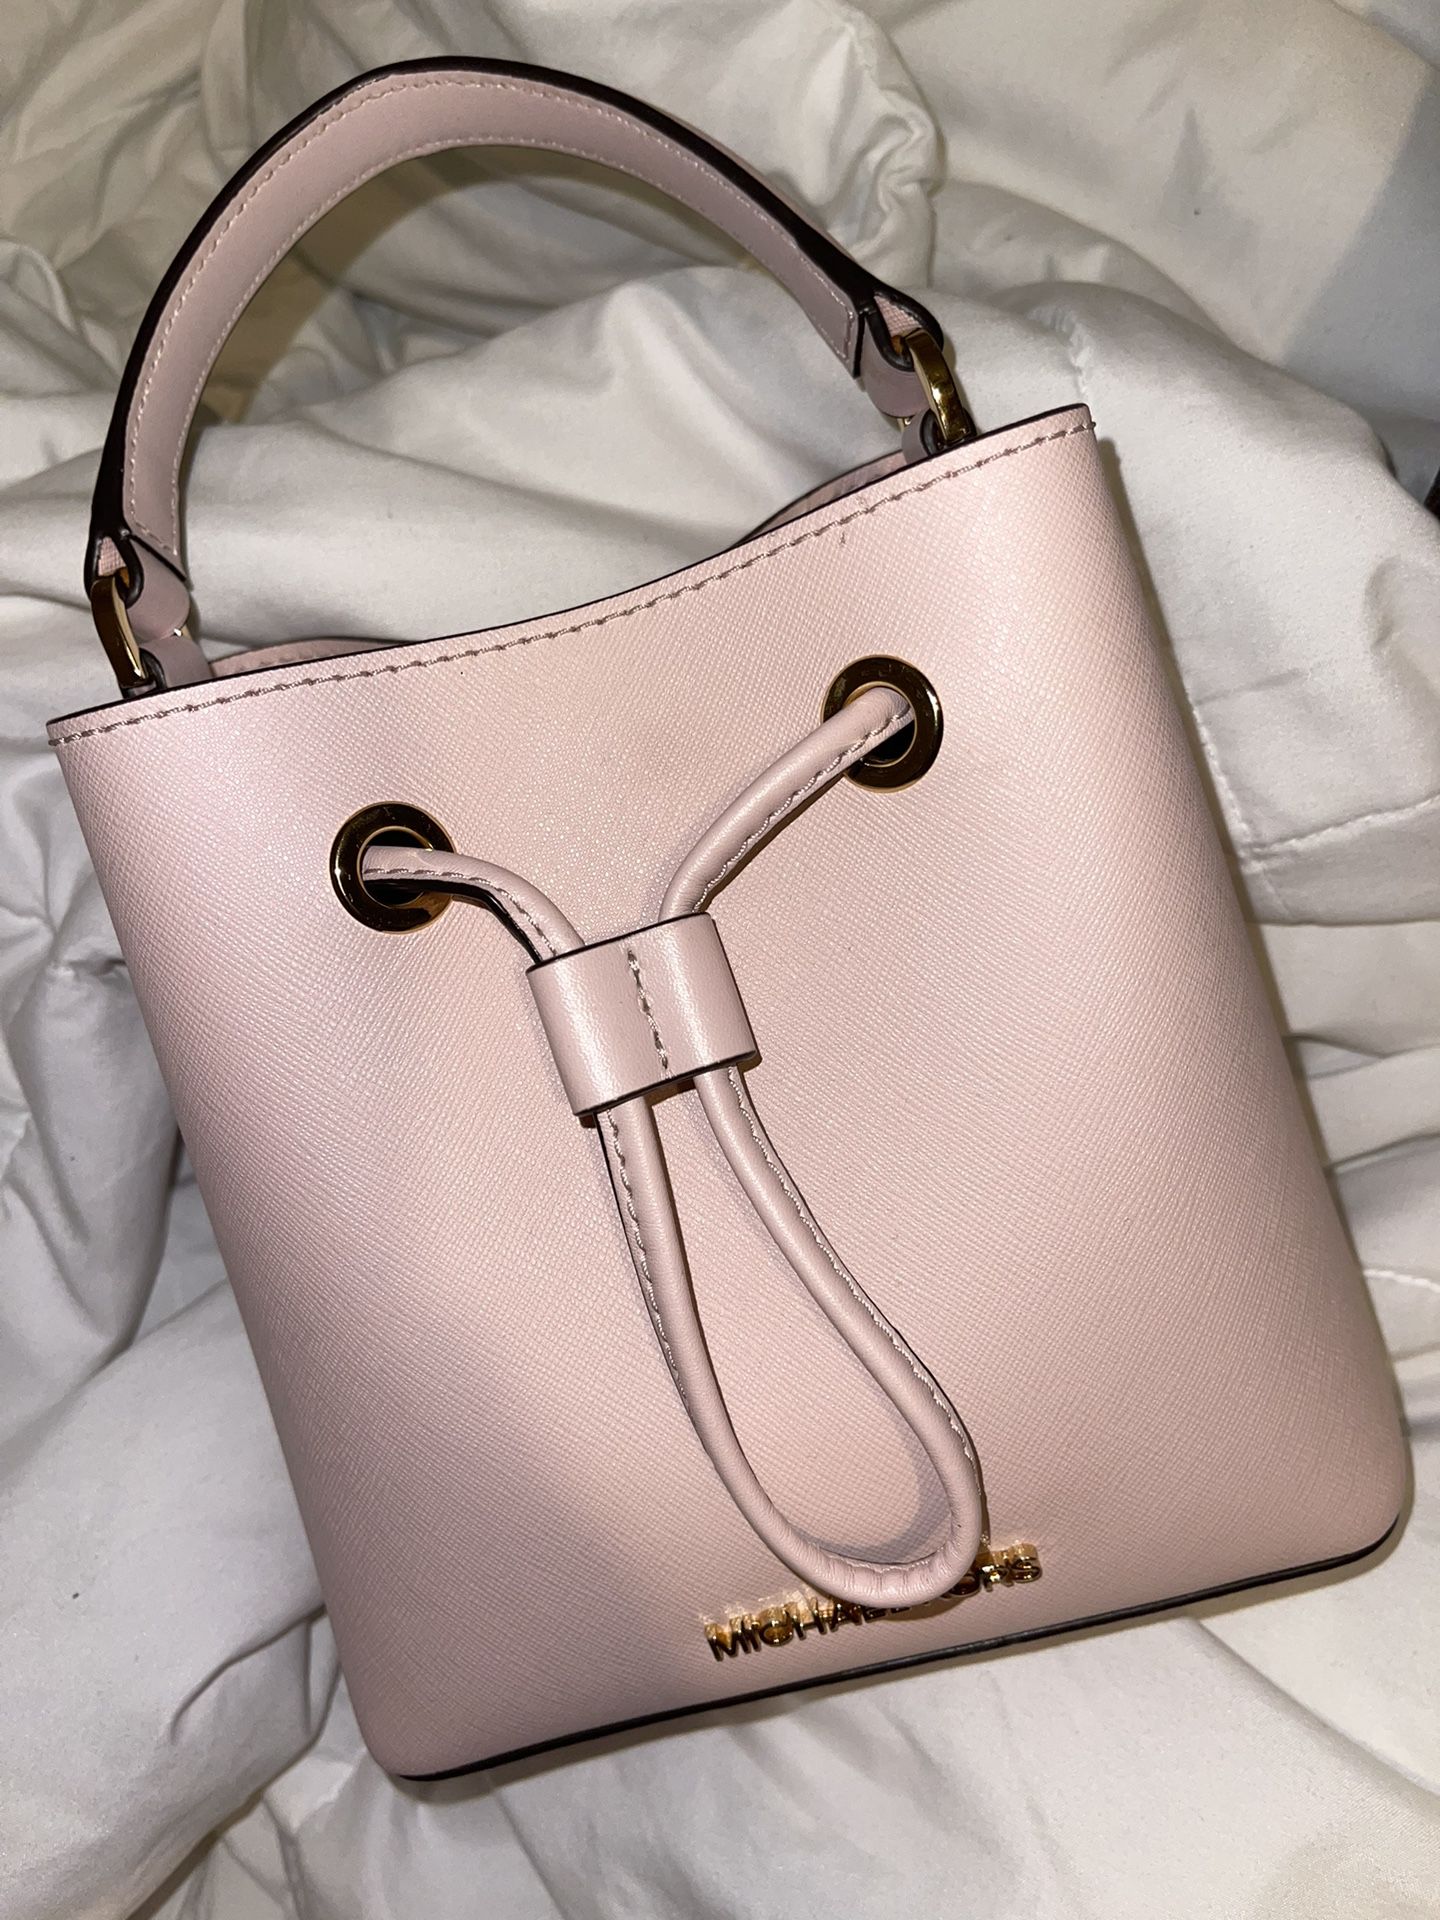 Michael Kors Pink Tote for Sale in Bakersfield, CA - OfferUp